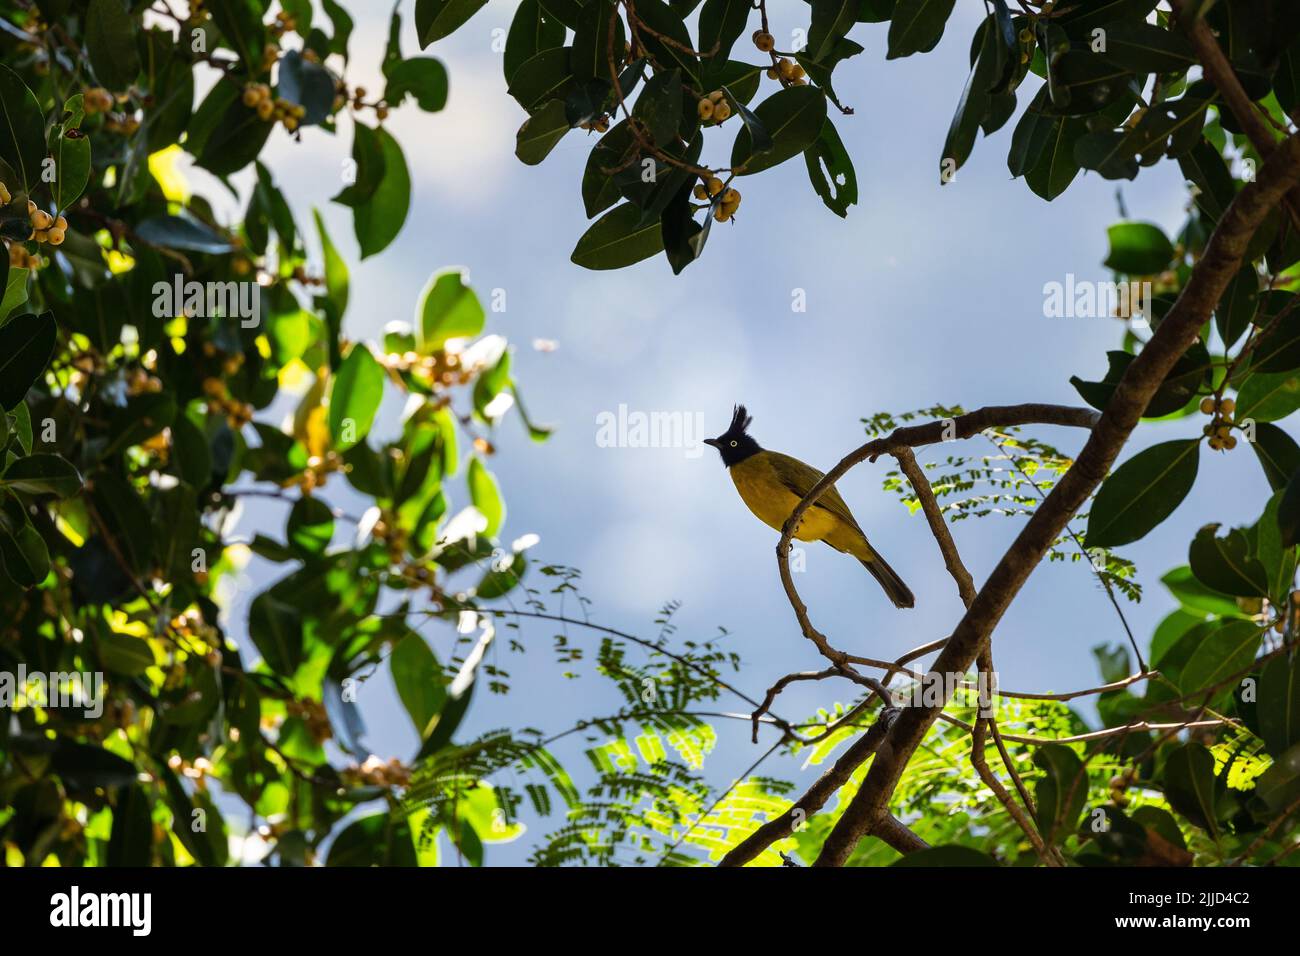 Black crested bulbul (Rubigula flaviventris), standin on a branch of a fig tree, Thailand Stock Photo